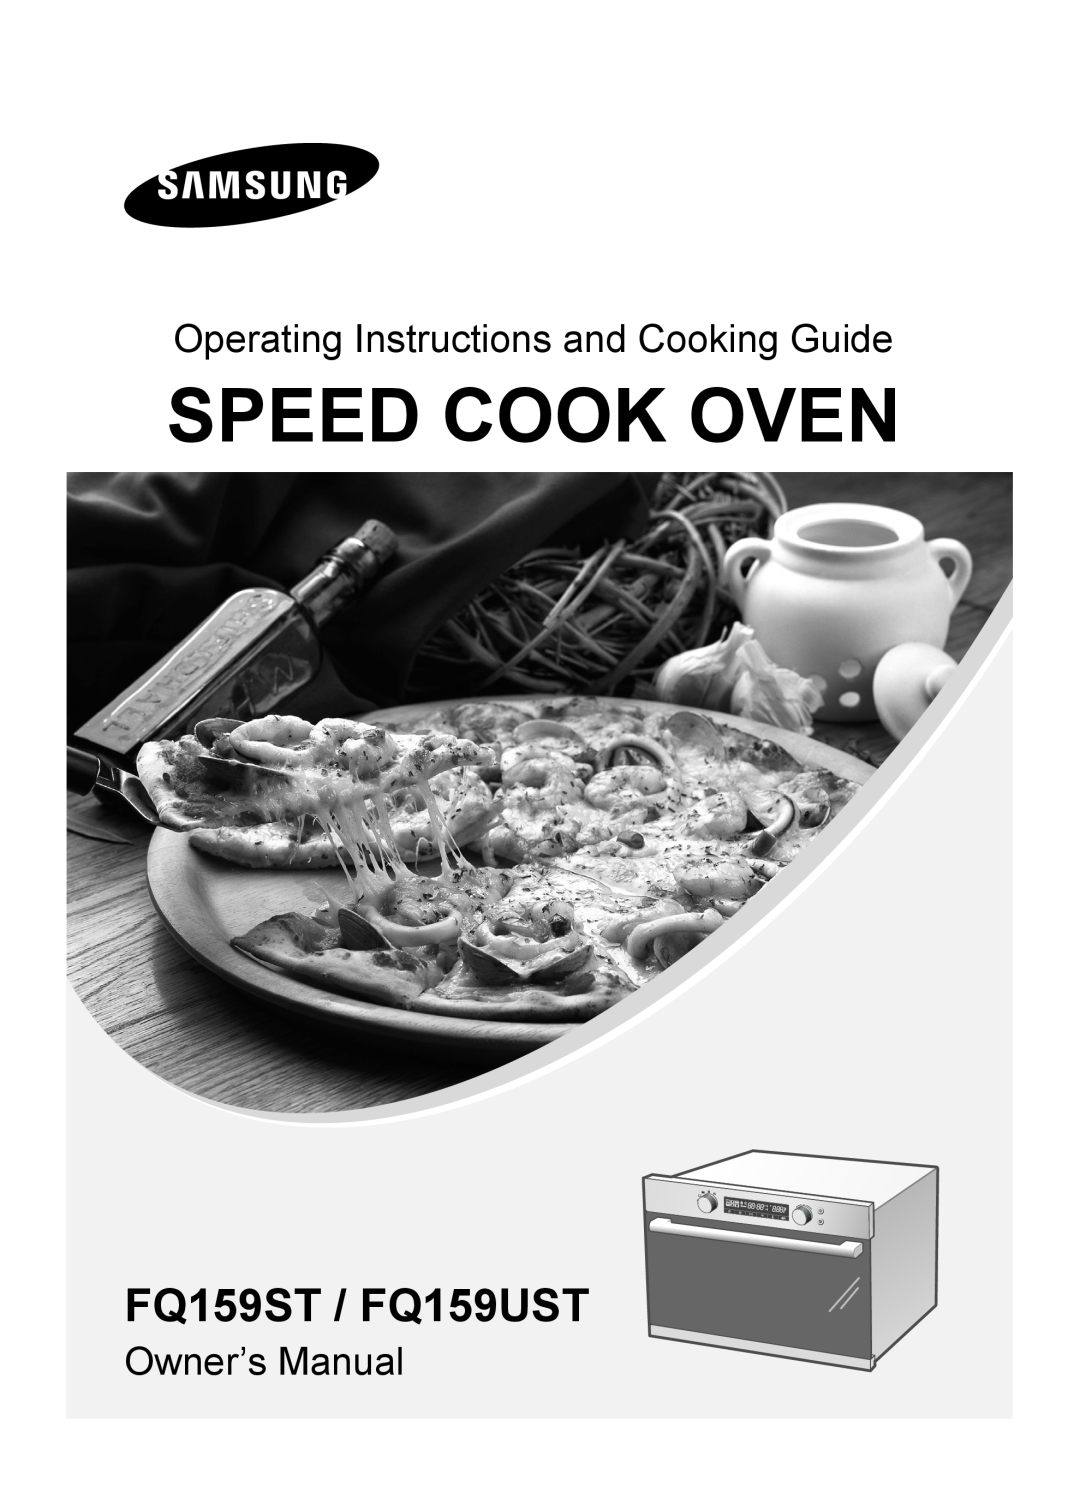 Samsung owner manual Speed Cook Oven, FQ159ST / FQ159UST, Operating Instructions and Cooking Guide 